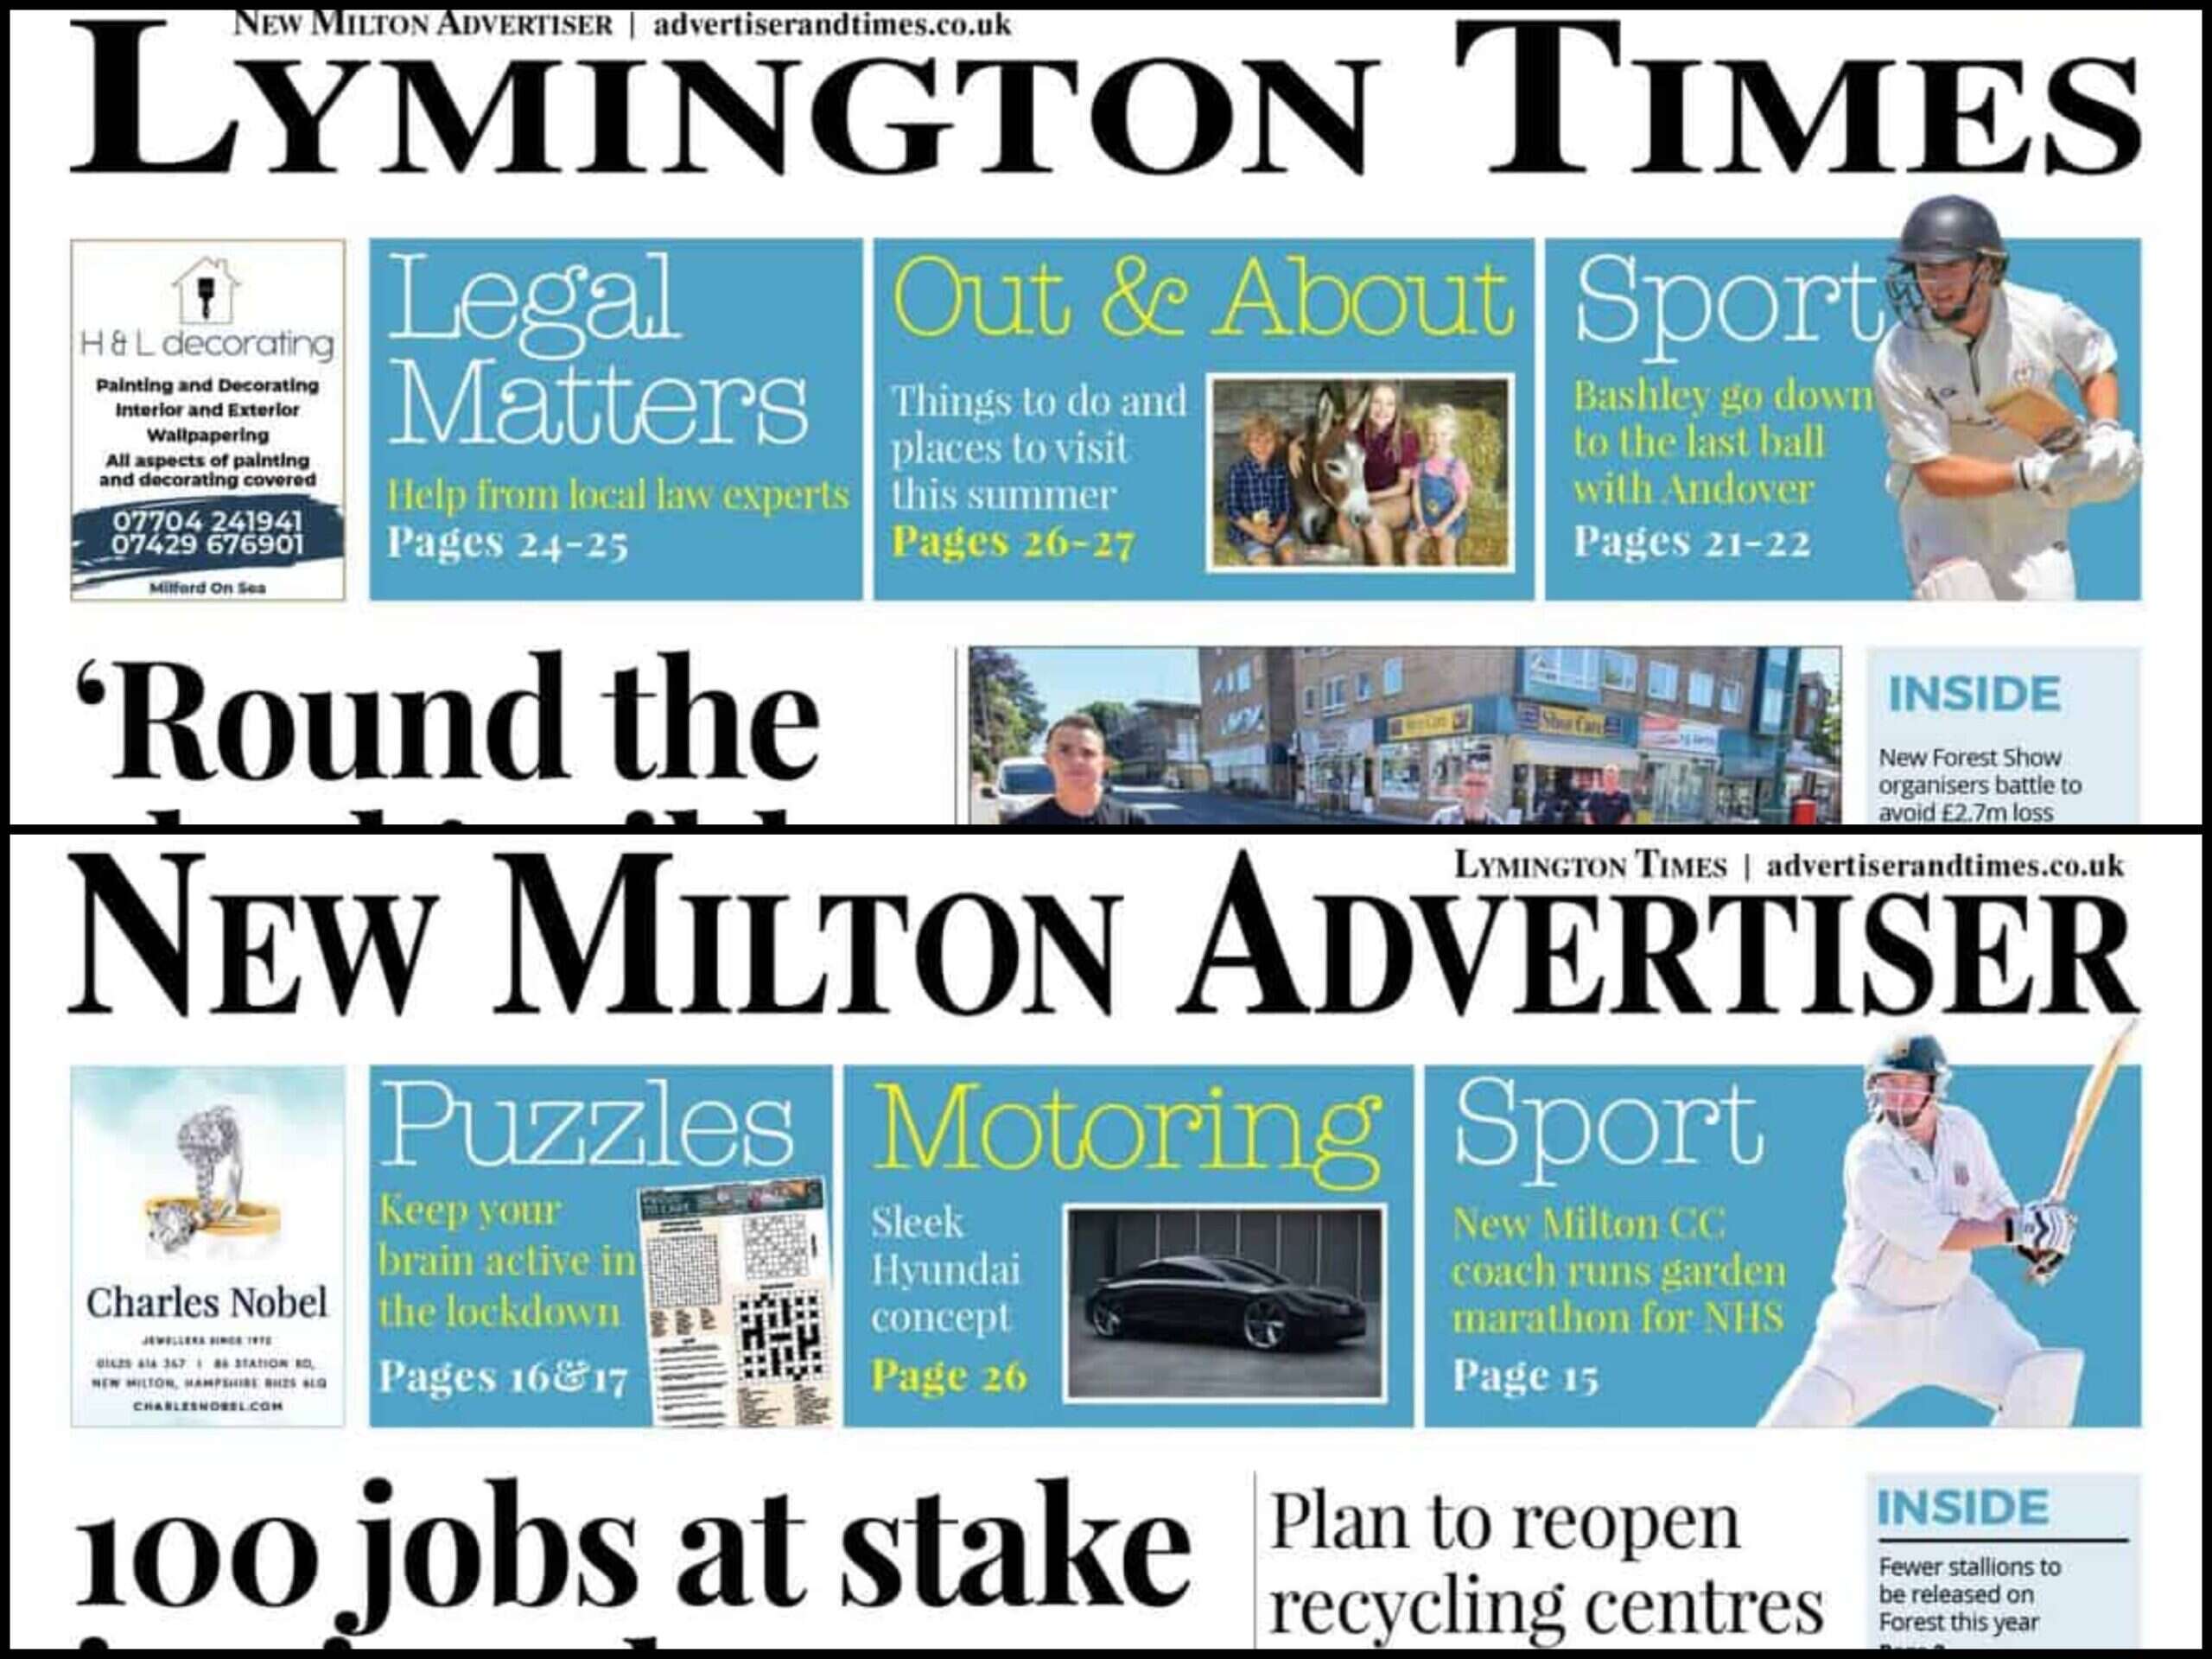 New Milton Advertiser and Lymington Times newspapers|